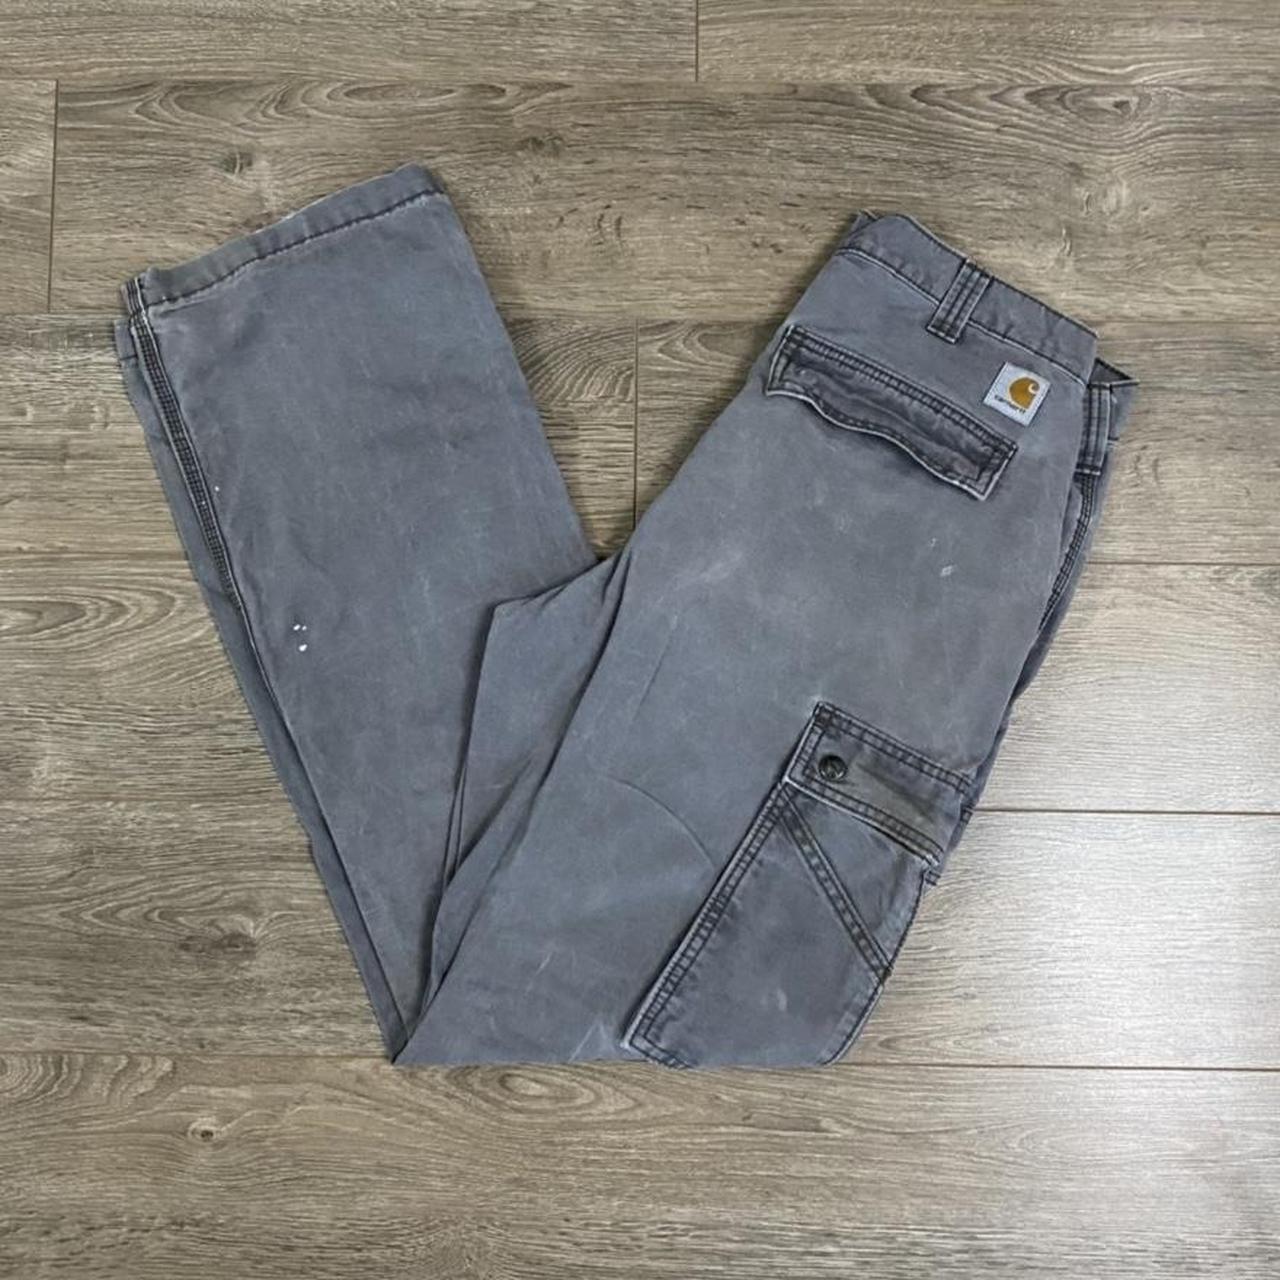 Grey Carhartt Carpenter Trousers 00s Casual Relaxed... - Depop